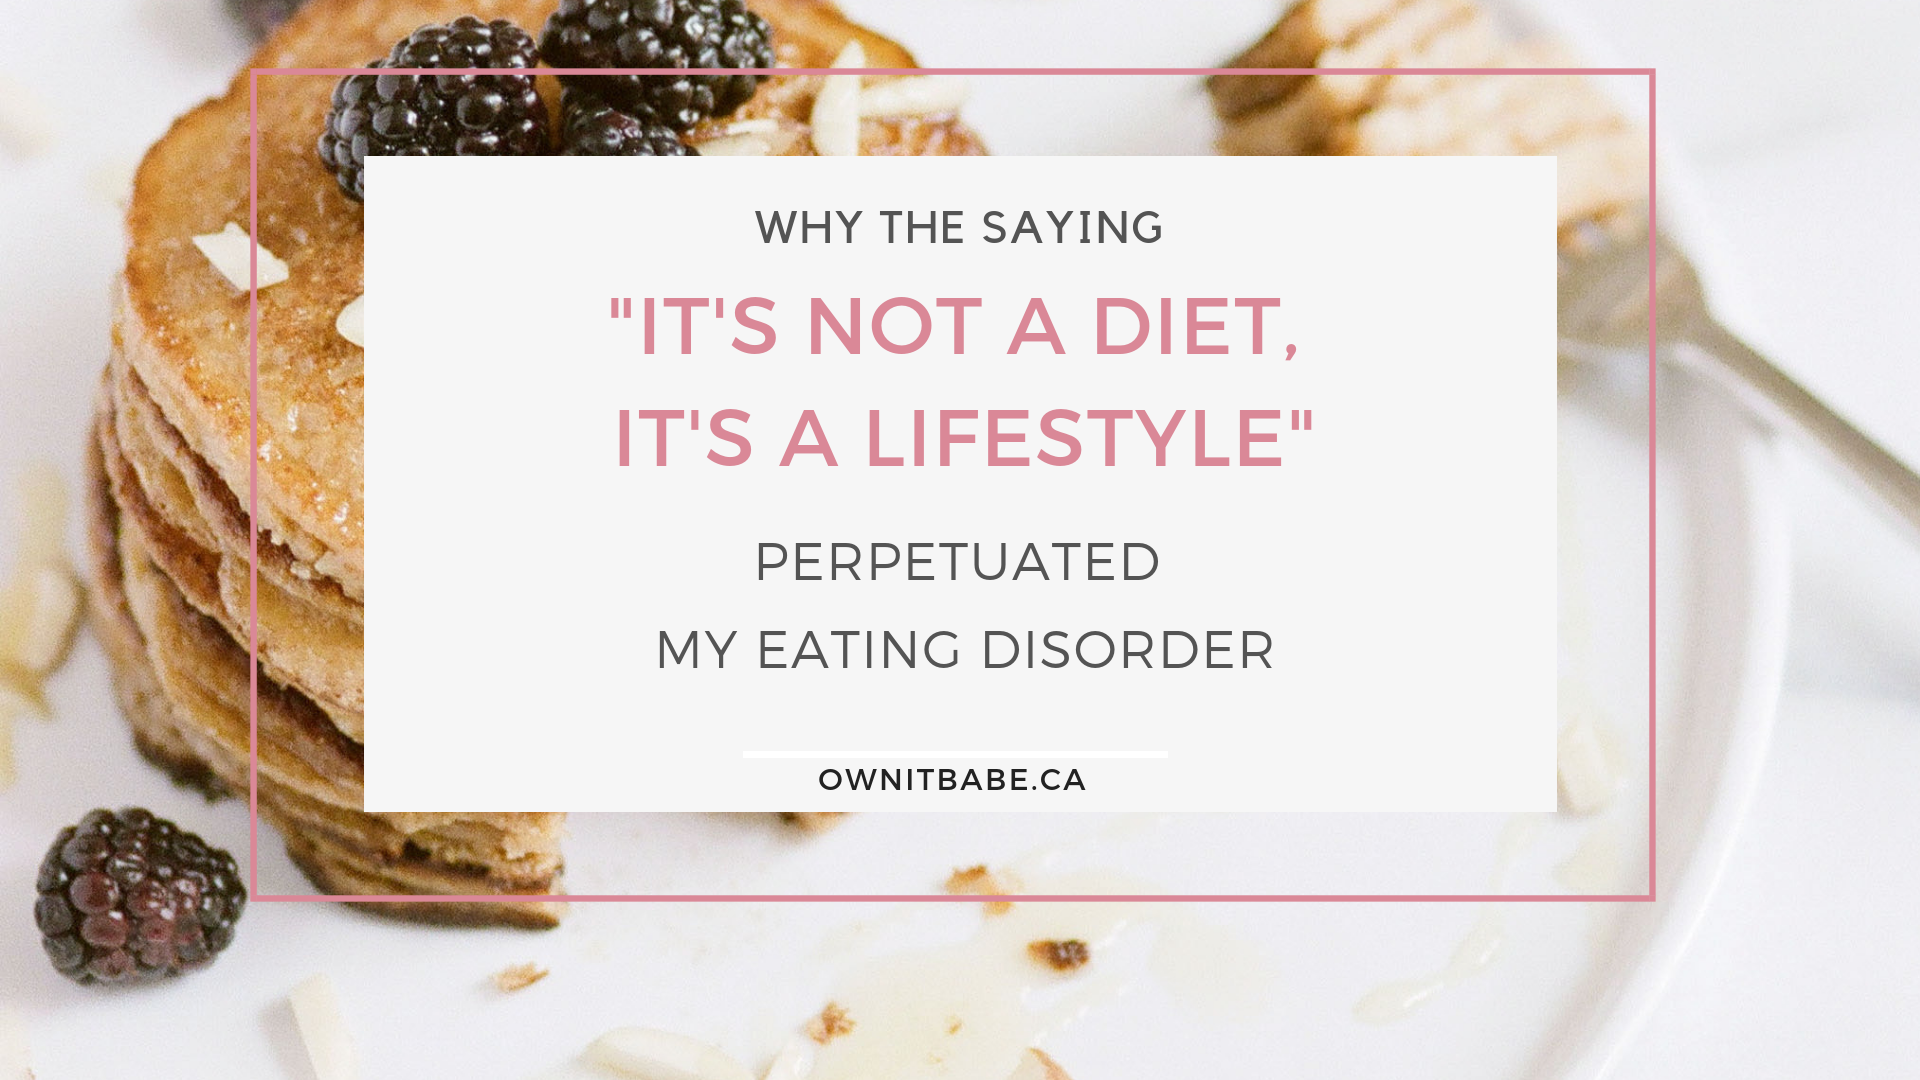 I used to say "It's not a diet, it's a lifestyle", but for me, it was an excuse to keep restricting food and exercising excessively. This caused a lot of mental and physical damage, so I am here to bust the myths today! #dieting #edrecovery